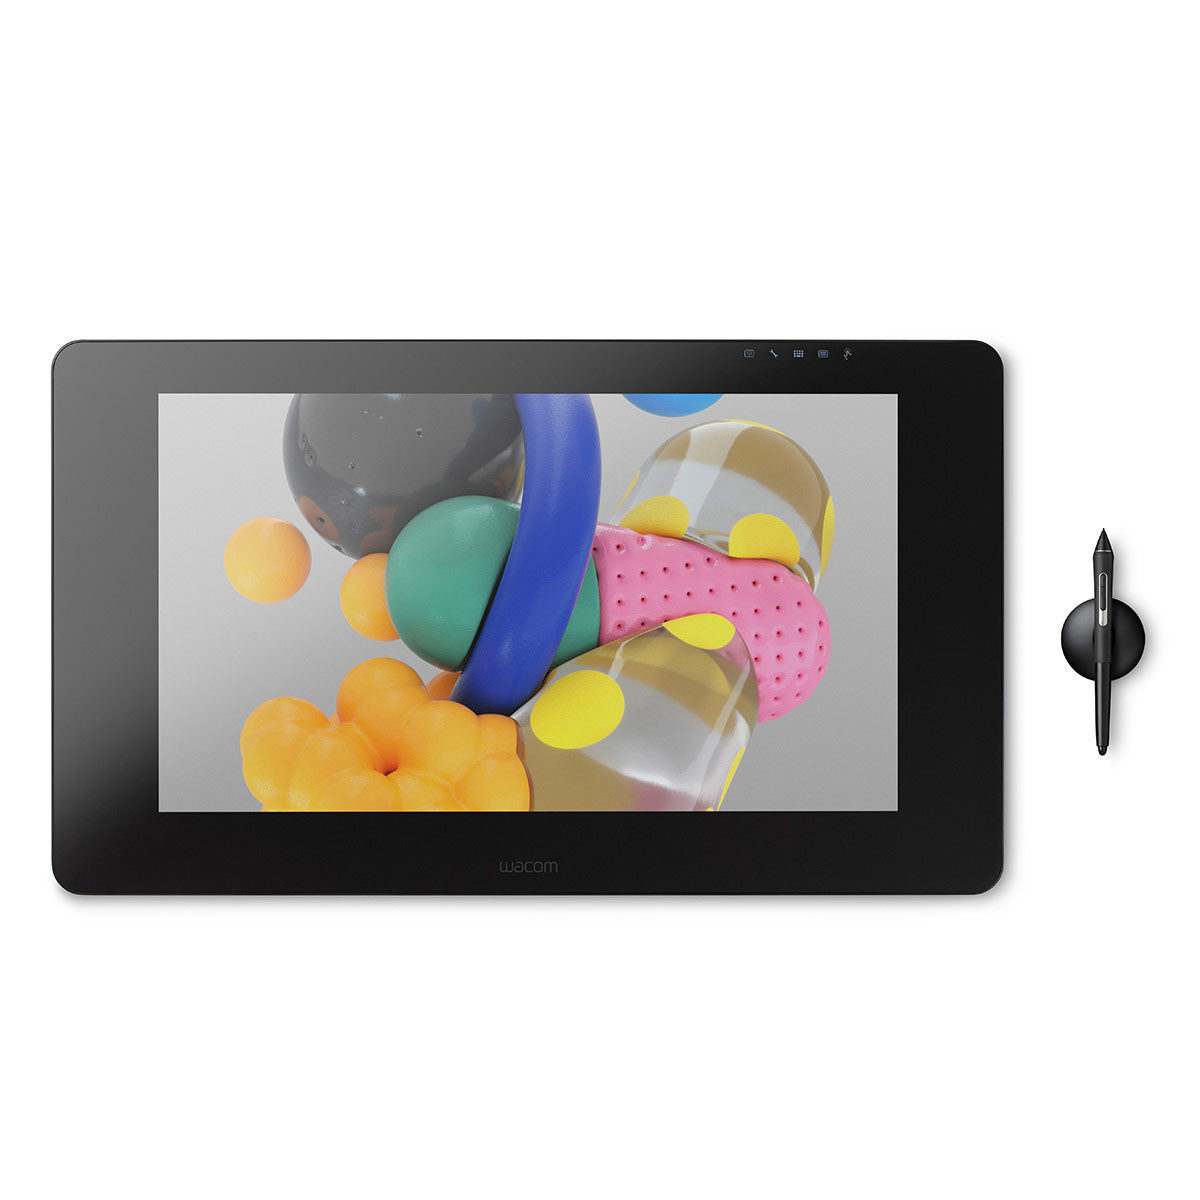 Wacom Cintiq Pro 24 Interactive Pen and Touch Display Tablet